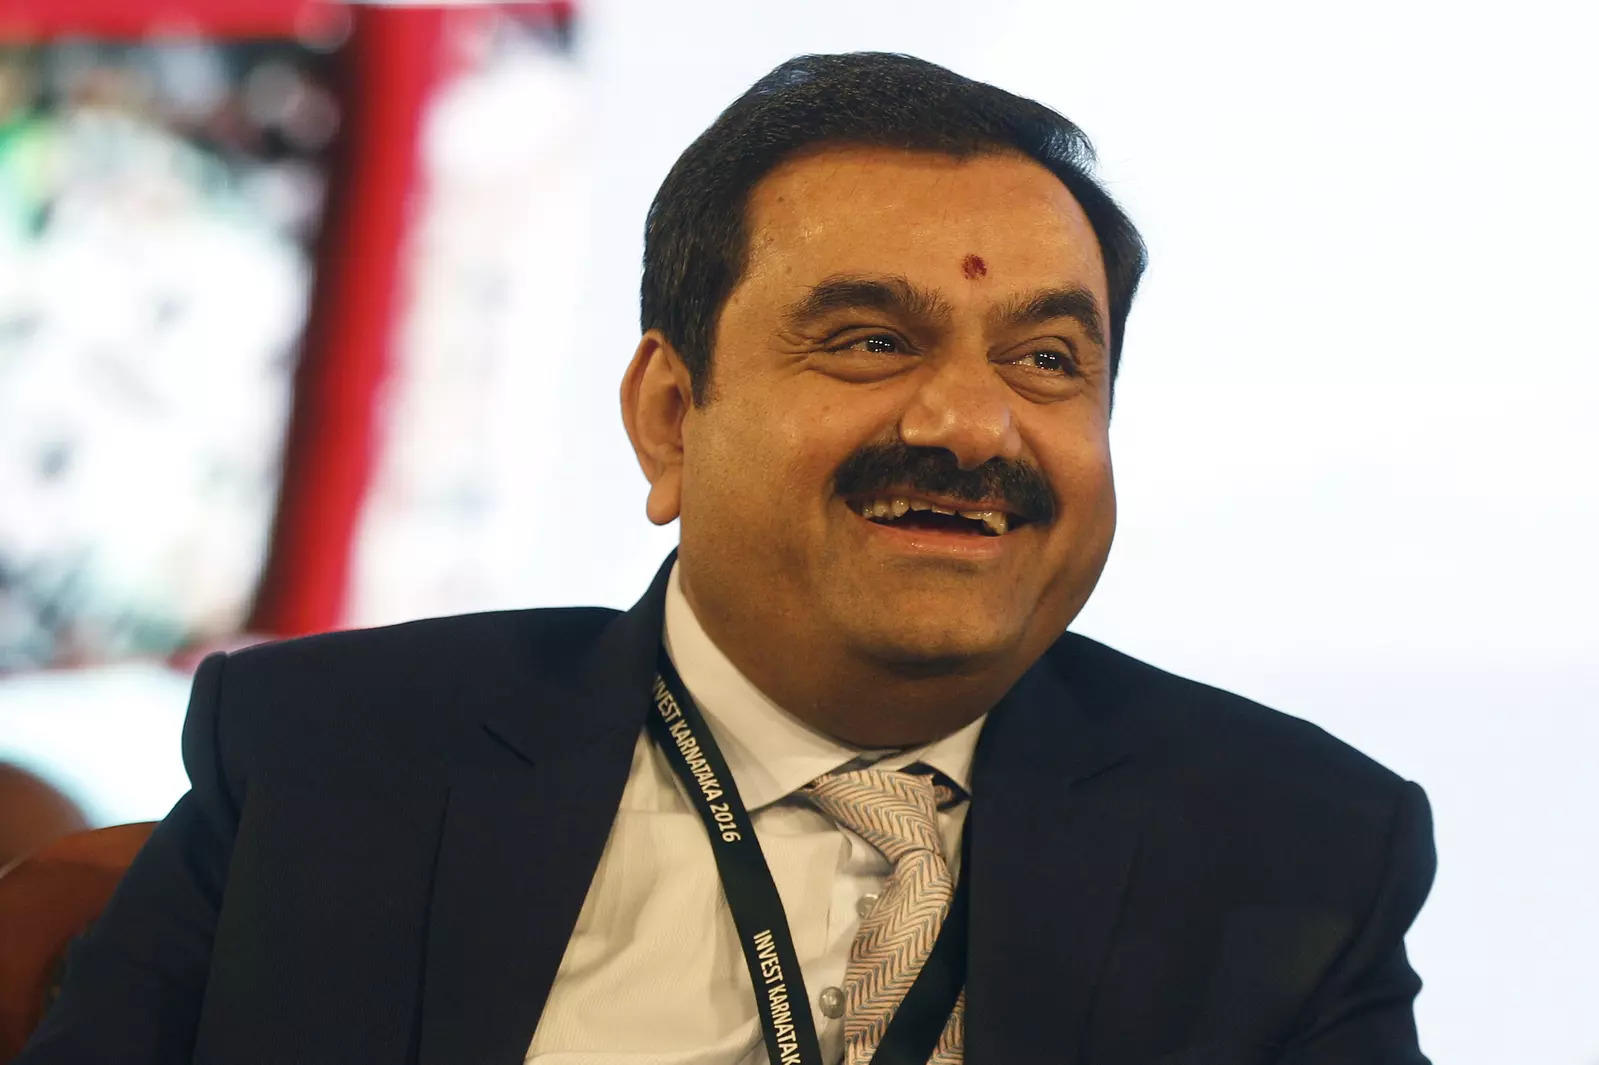 Adani bonds hit distressed levels after stock sale is pulled